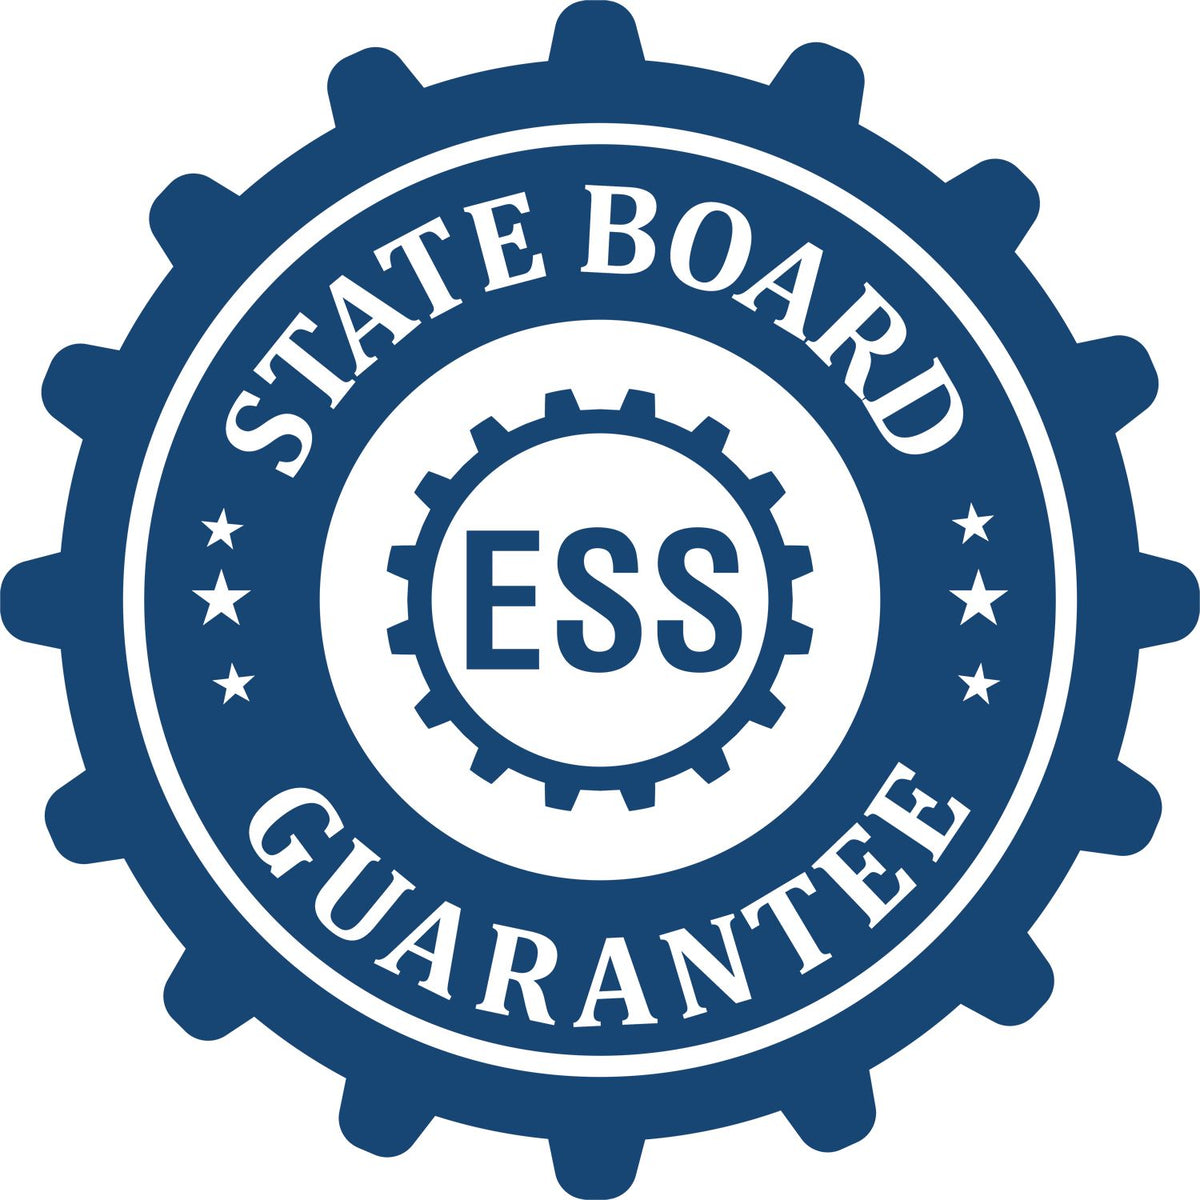 An emblem in a gear shape illustrating a state board guarantee for the Heavy-Duty West Virginia Rectangular Notary Stamp product.